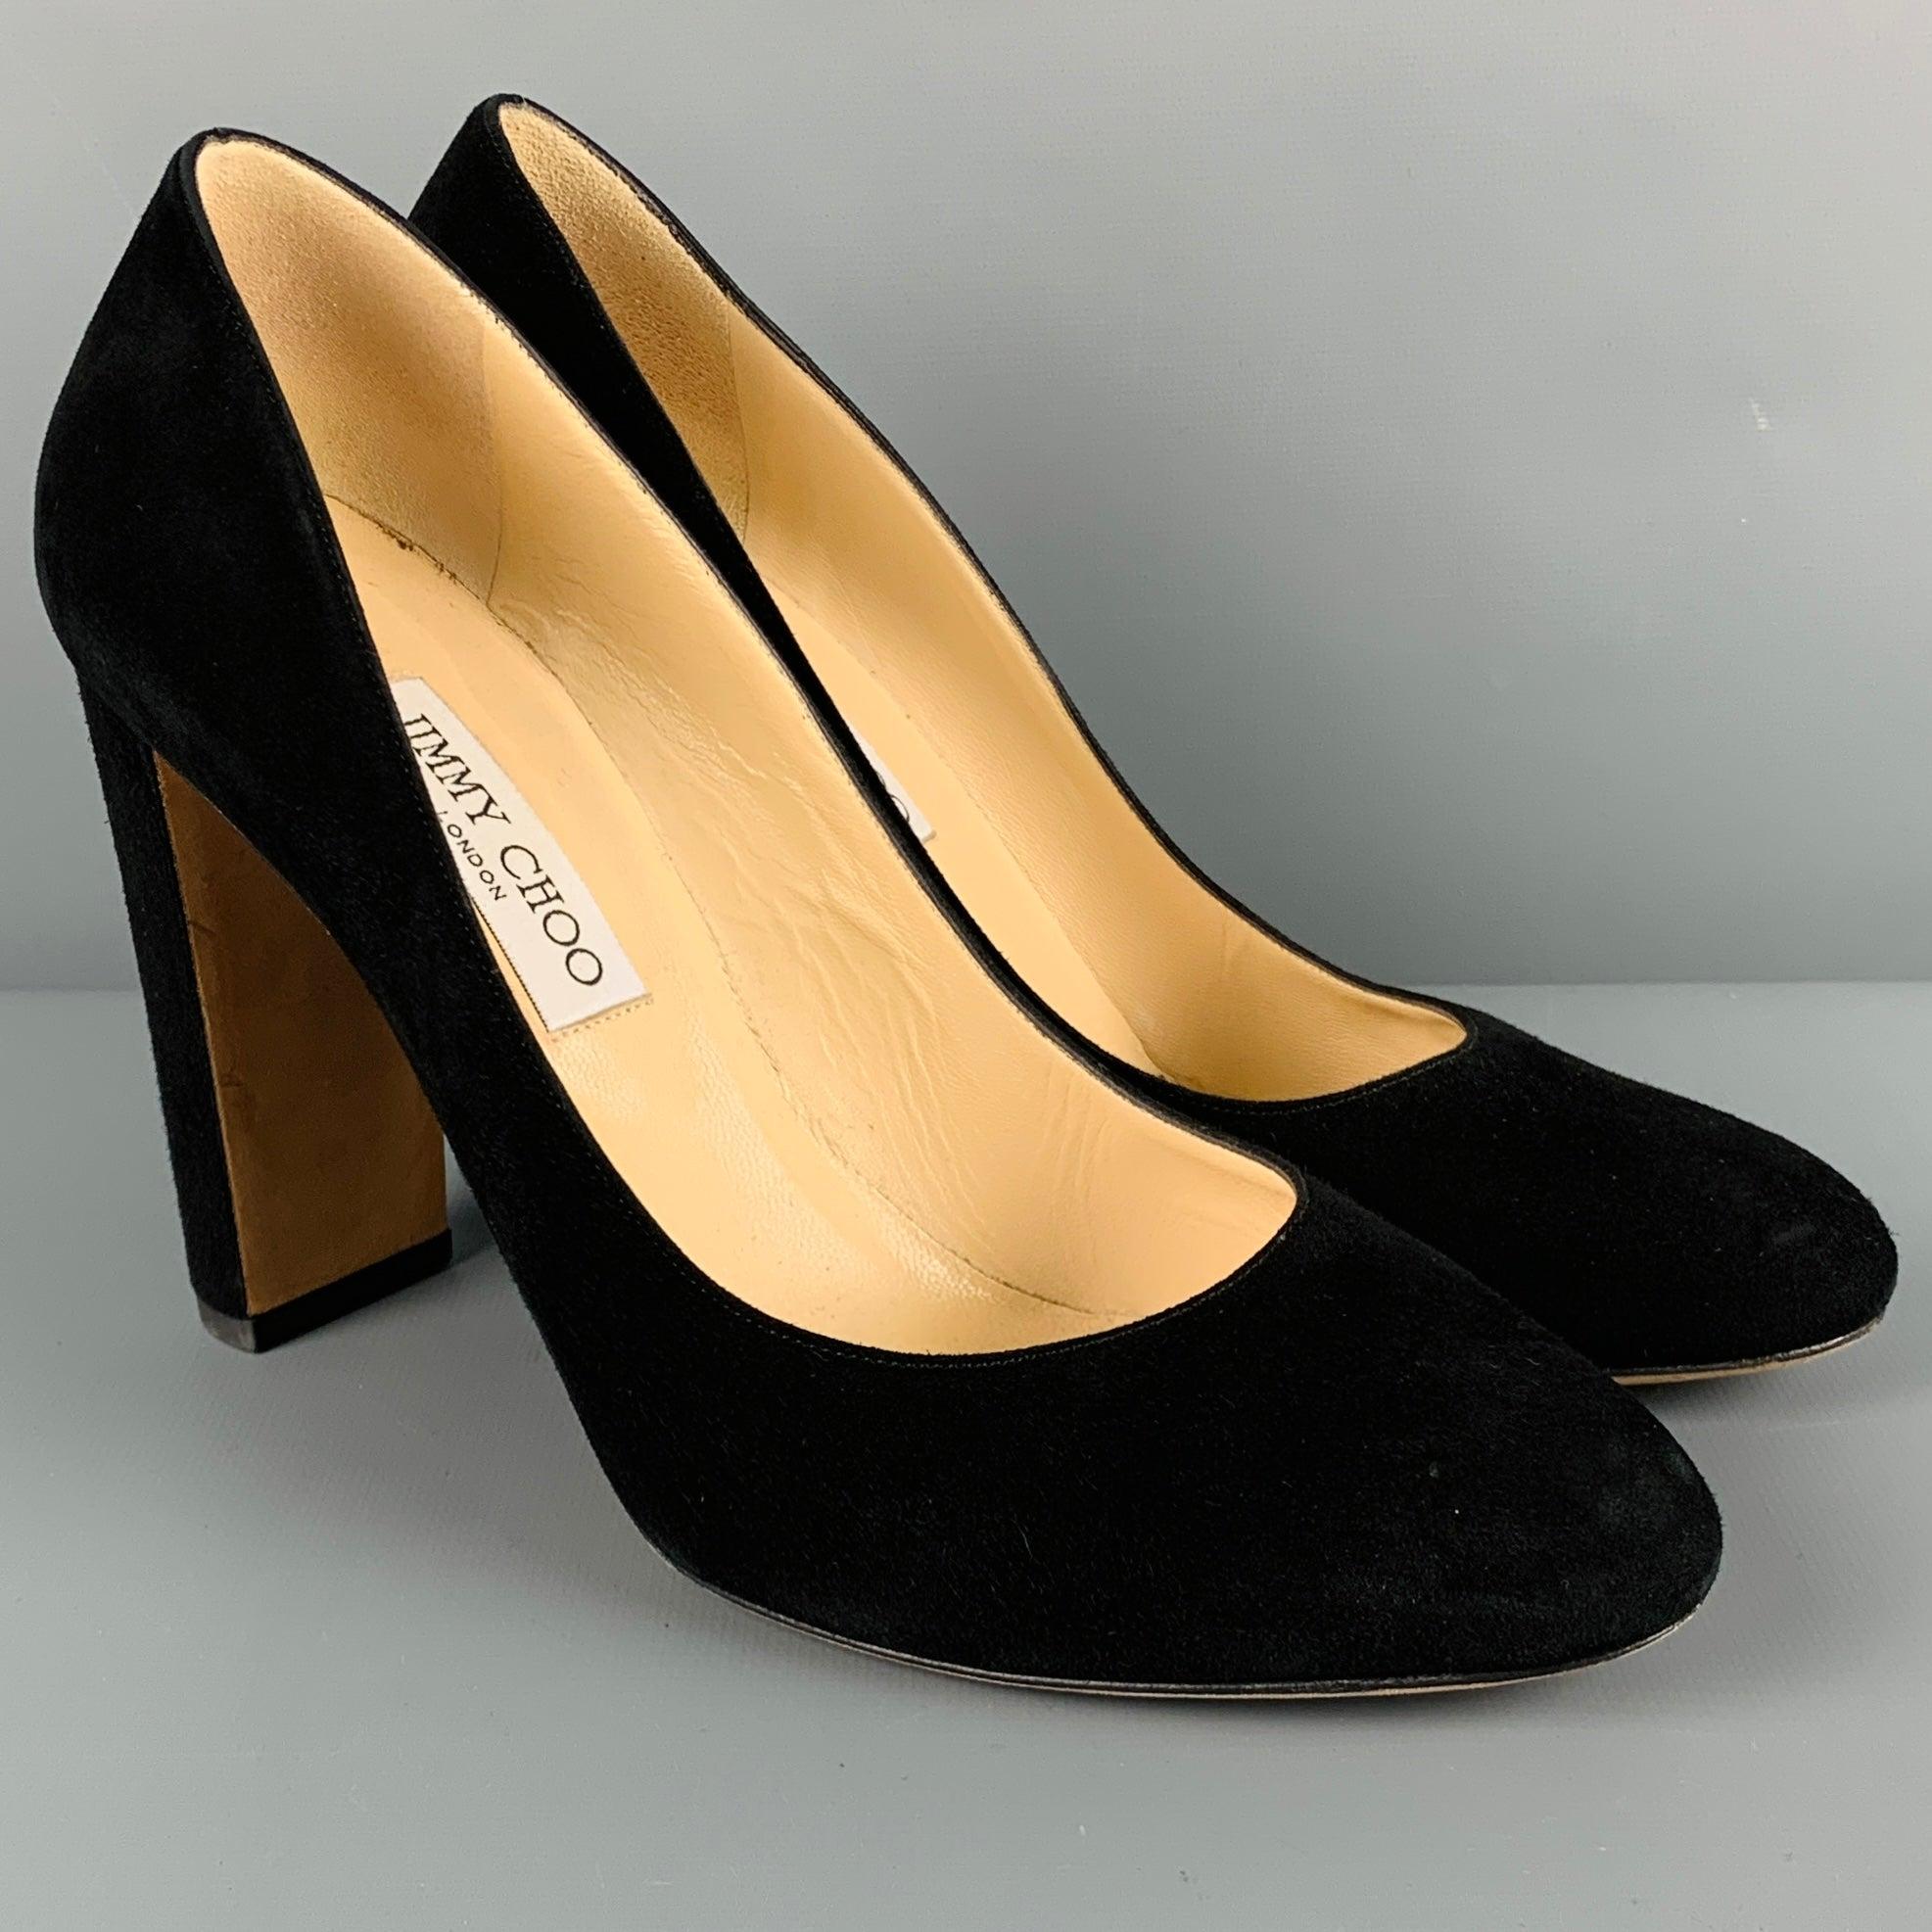 JIMMY CHOO pumps in a black suede fabric featuring a chunky heel, and slip on closure. Made in Italy.Very Good Pre-Owned Condition. Minor signs of wear. 

Marked:   41.5 

Measurements: 
  Heel: 4.25 inches 
  
  
 
Reference No.: 129073
Category: